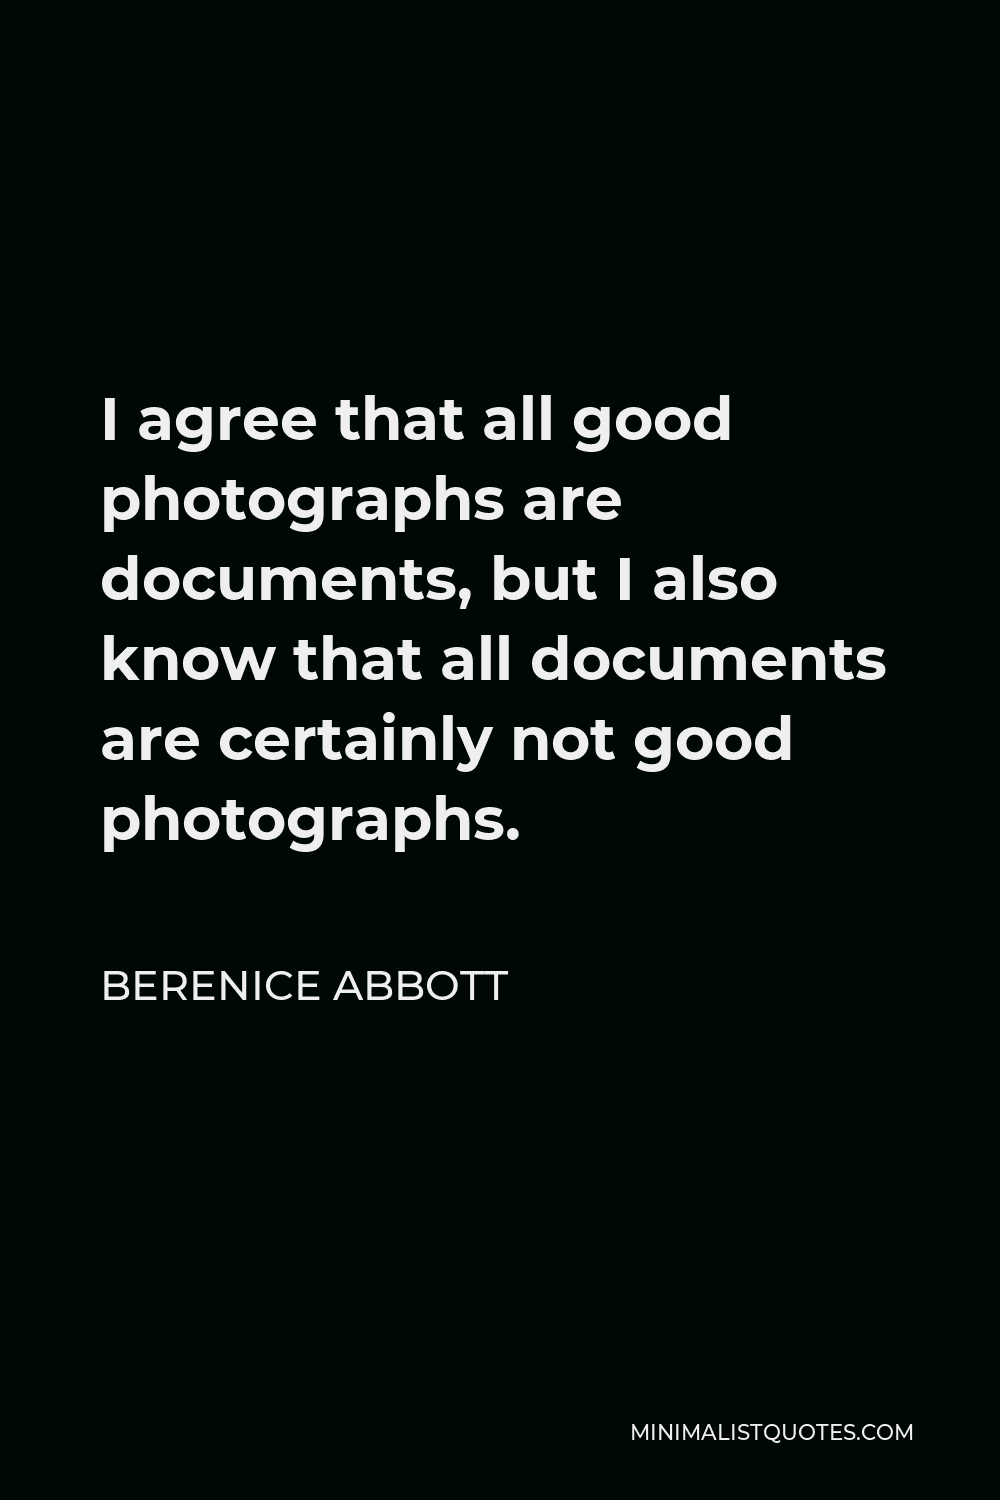 Berenice Abbott Quote - I agree that all good photographs are documents, but I also know that all documents are certainly not good photographs.